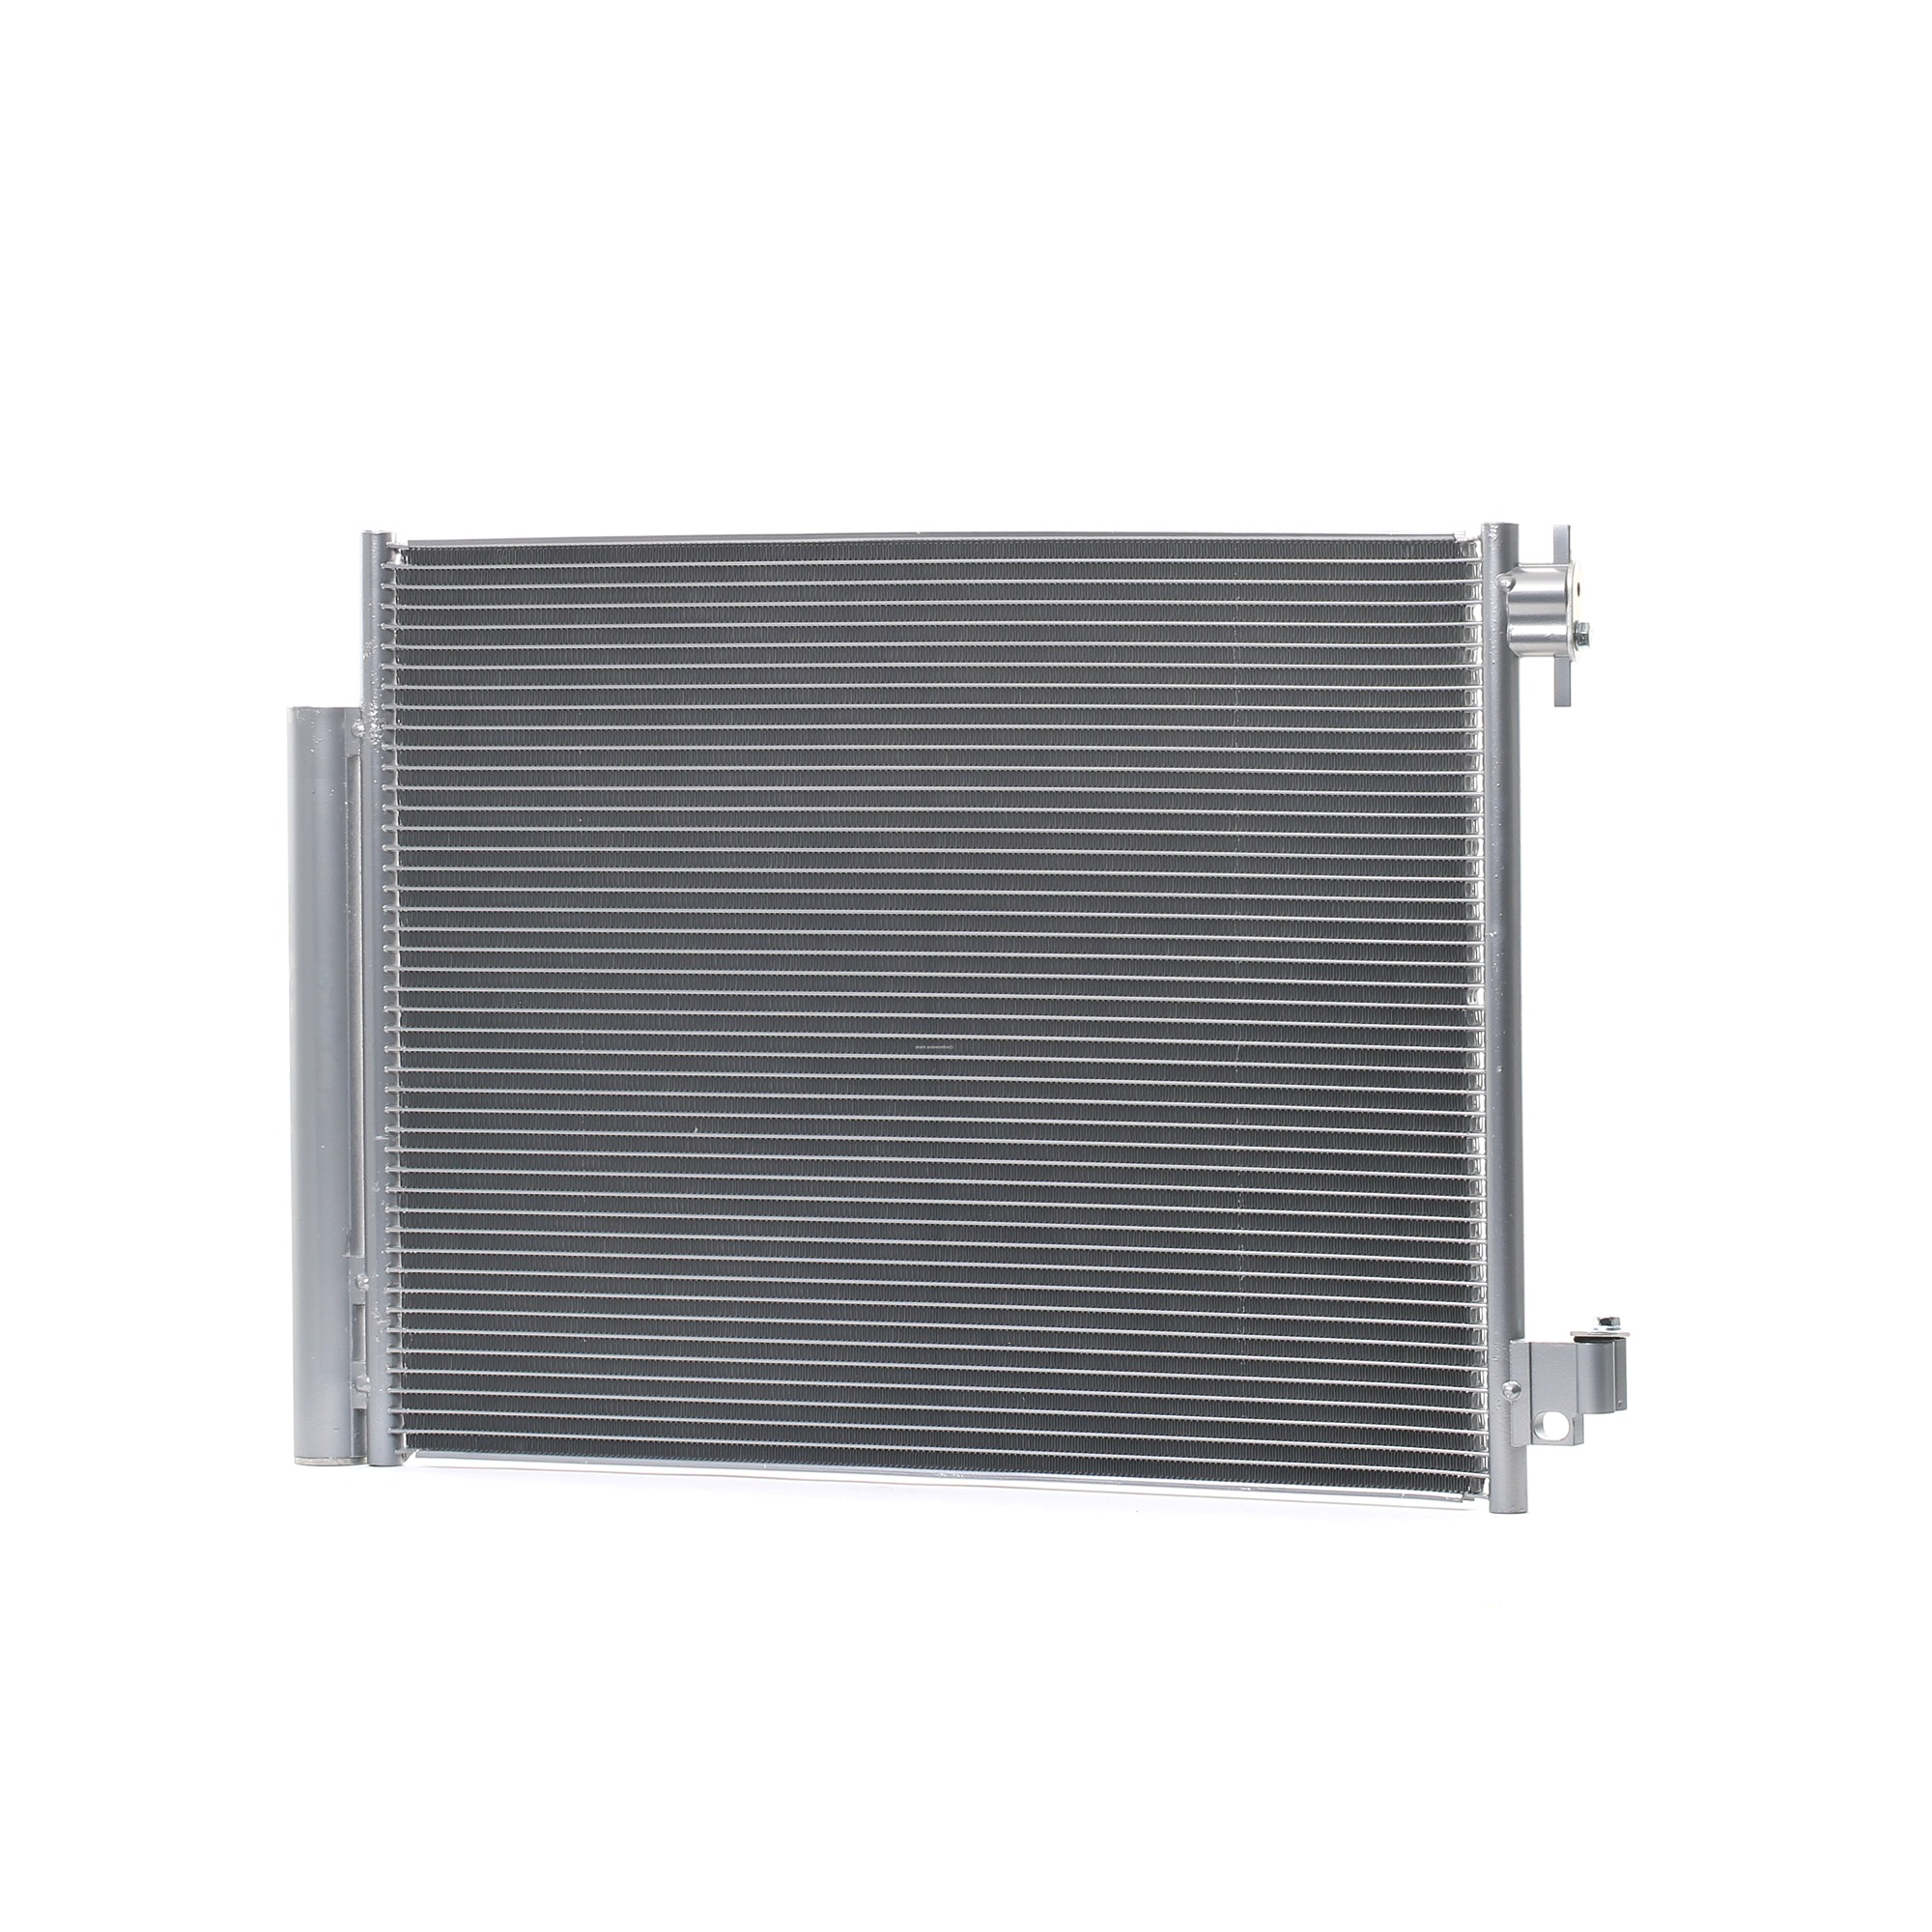 STARK SKCD-0110575 Air conditioning condenser A 45 35 000 054